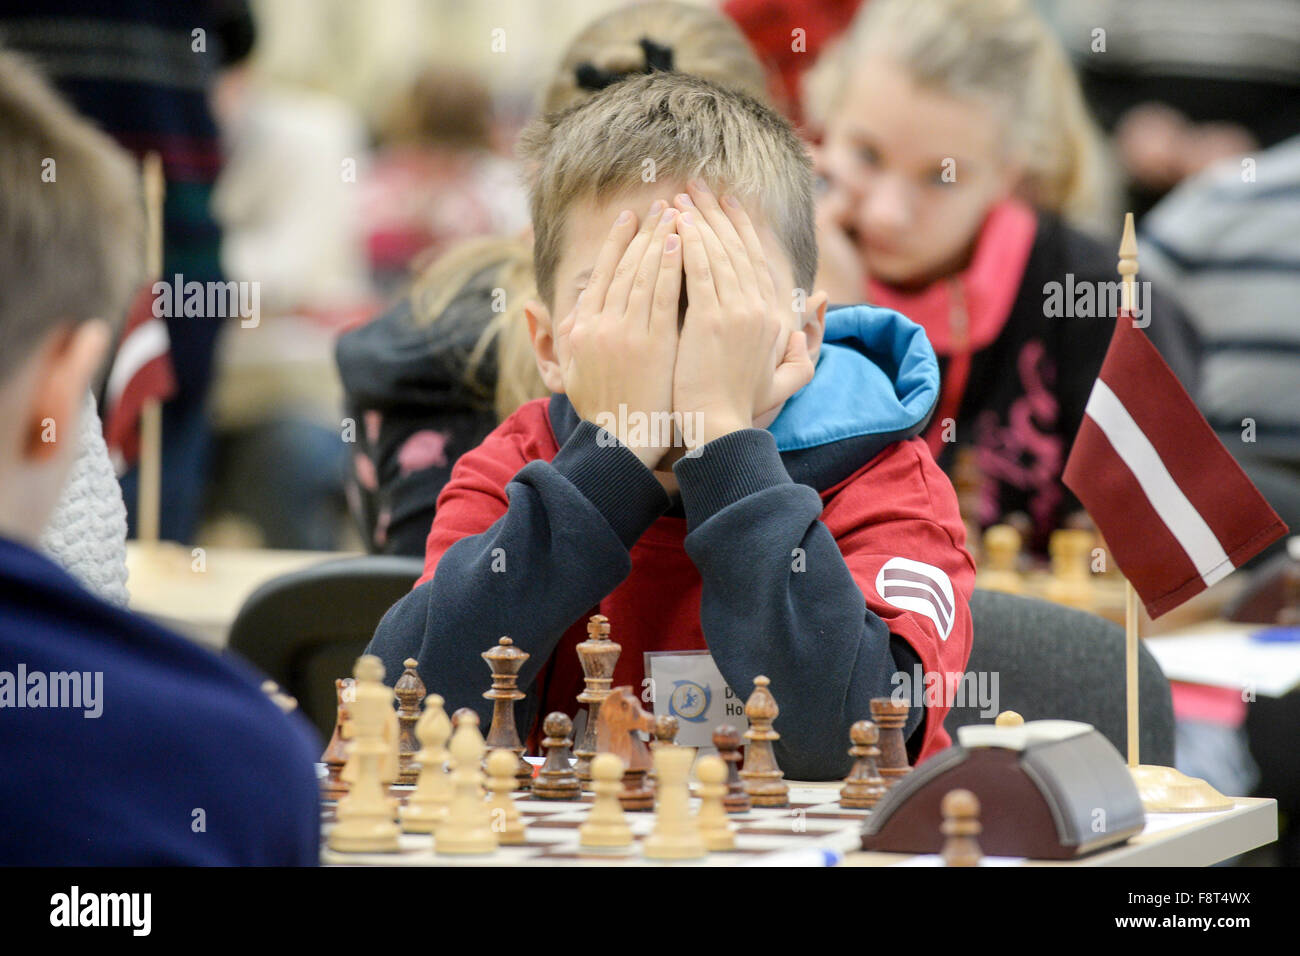 (151211) -- NARVA, Dec. 11, 2015 (Xinhua) -- A young chess player covers his face during 'The Starts of the Baltic Sea' chess tournament in Narva, third largest city of Estonia, on Dec. 11, 2015. Sixty young chess players aged 10 to 18 years old from Russia, Estonia, Finland, Latvia and Lithuania competed for the best World Chess Federation (FIDE) rating at this game. The game starts the FIDE celebration of 100 years of World famous Estonian Grandmaster Paul Keres (1916-1975) who was among the world's top players from the mid-1930s to the mid-1960s. Paul Keres was originally from Narva. (Xinhu Stock Photo